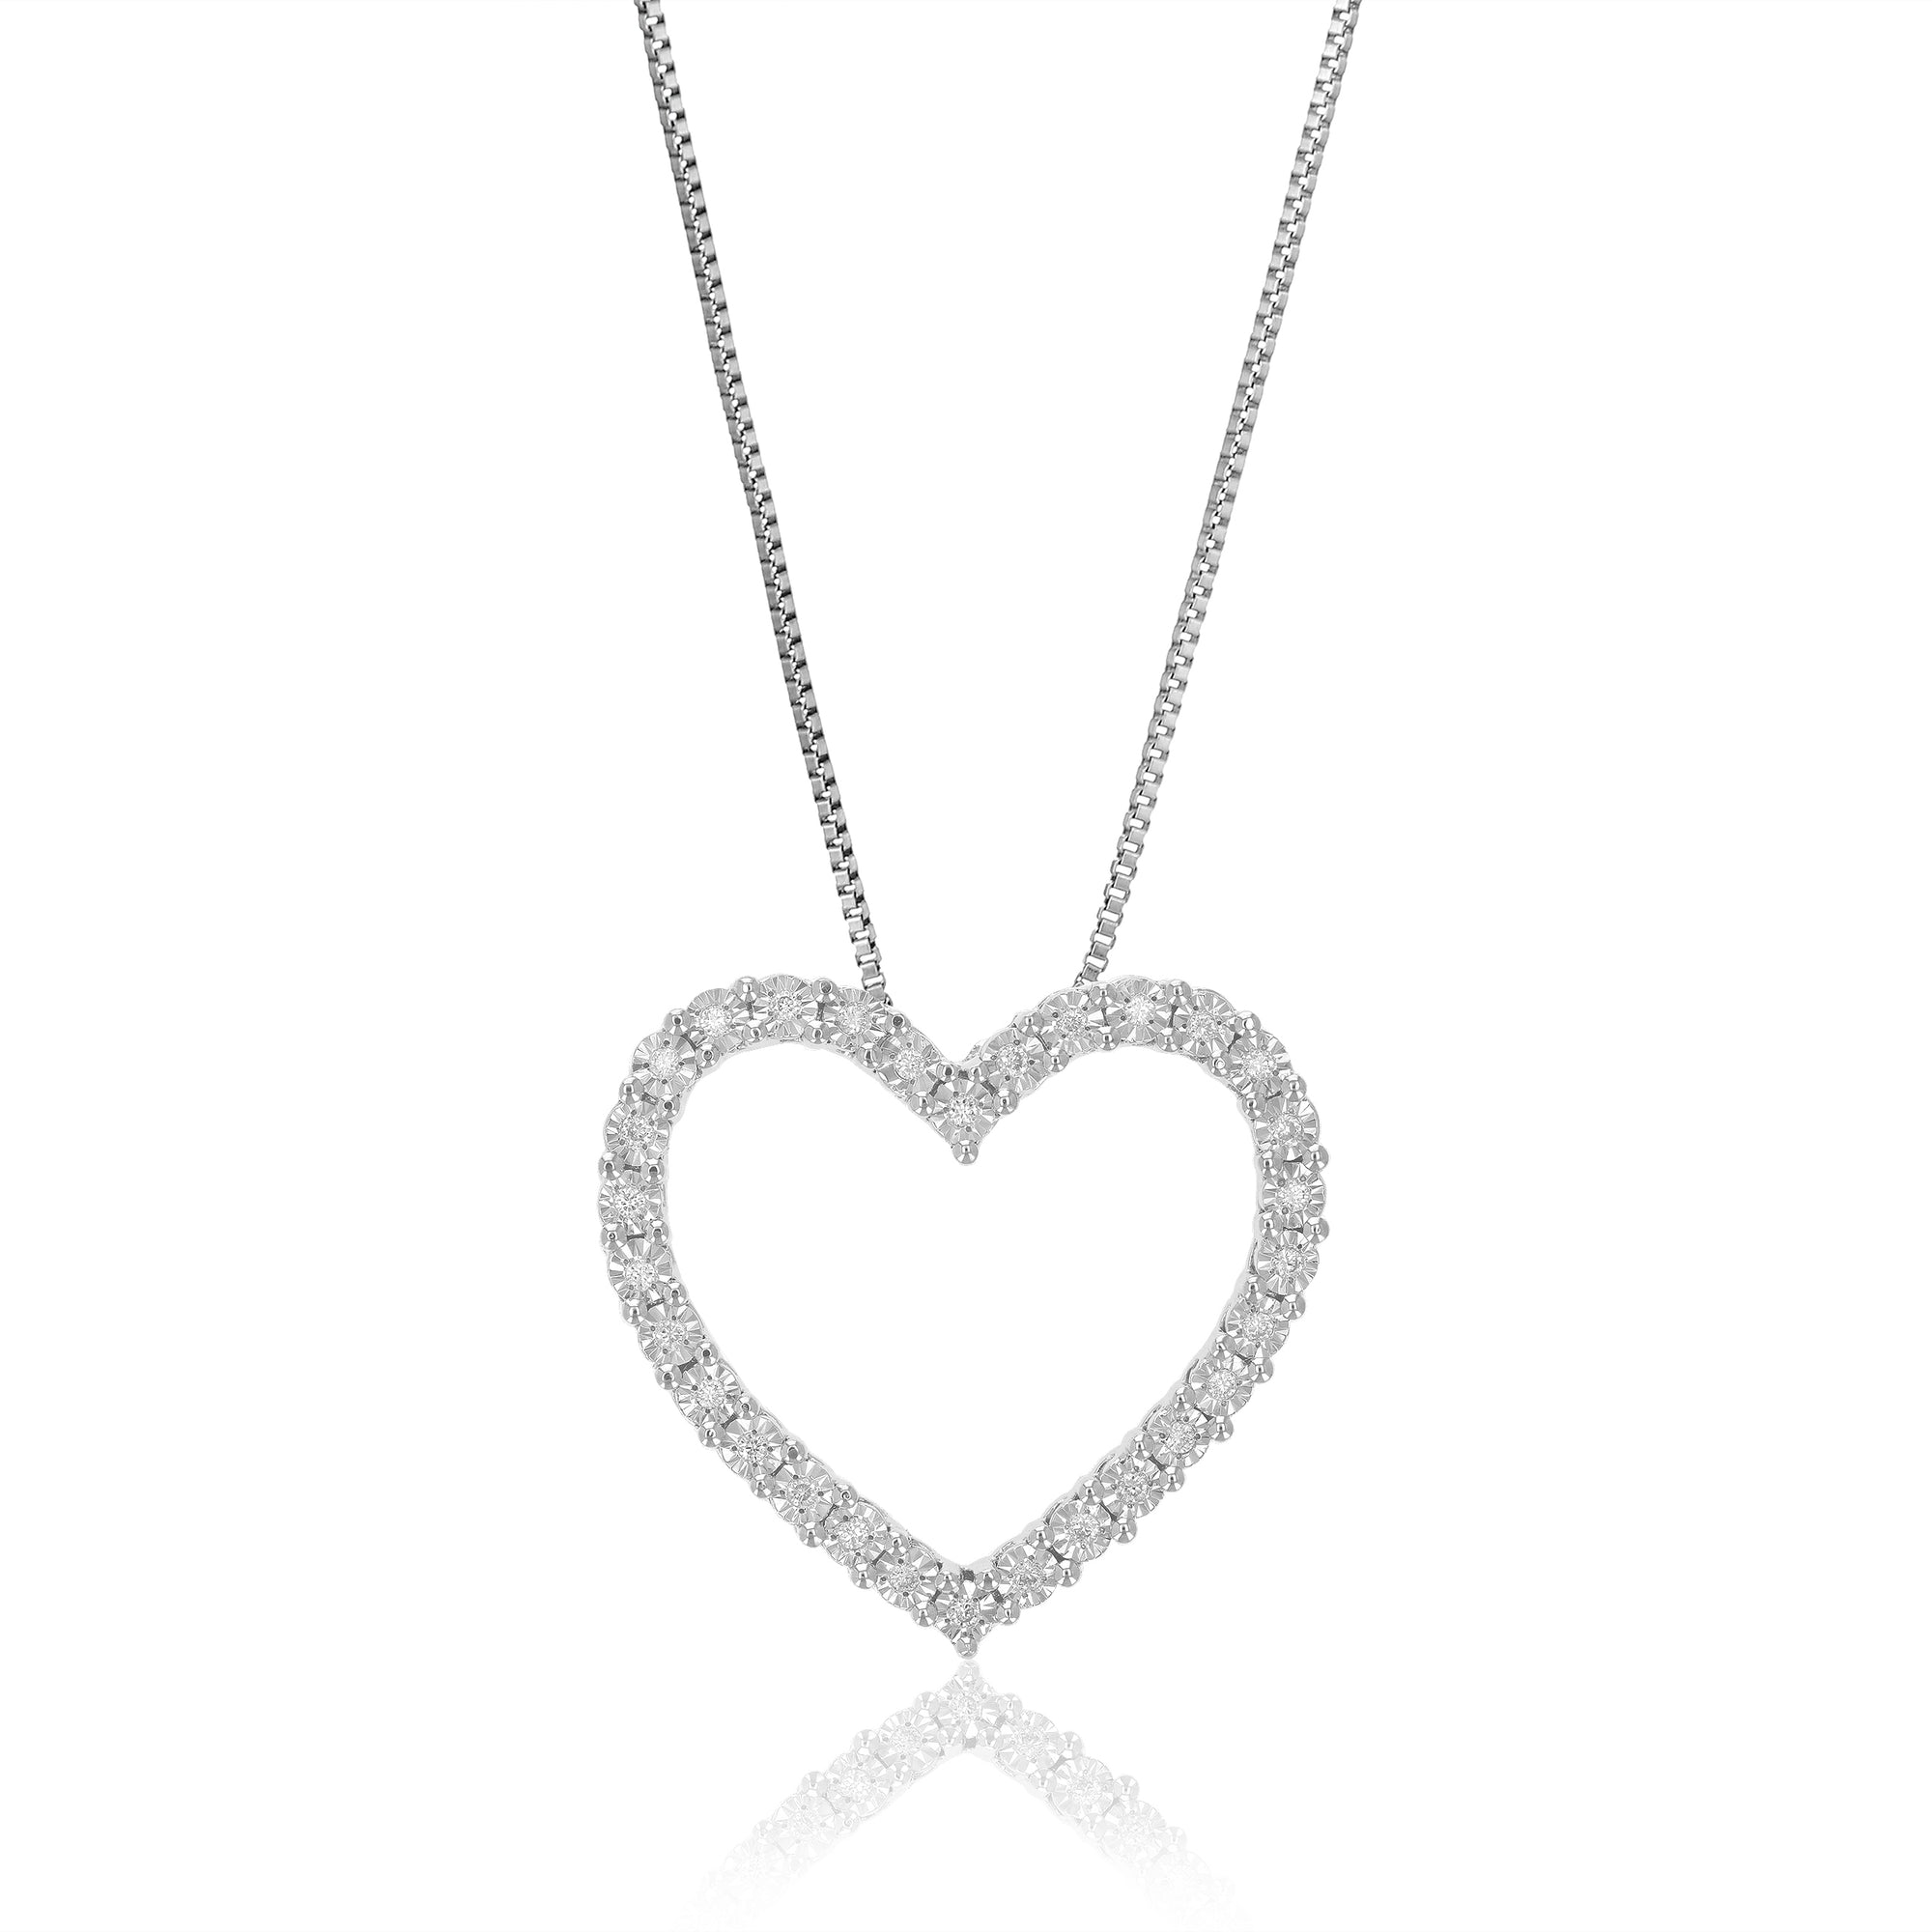 Heart Necklaces for Women 925 Silver Gold Chain Diamond Heart